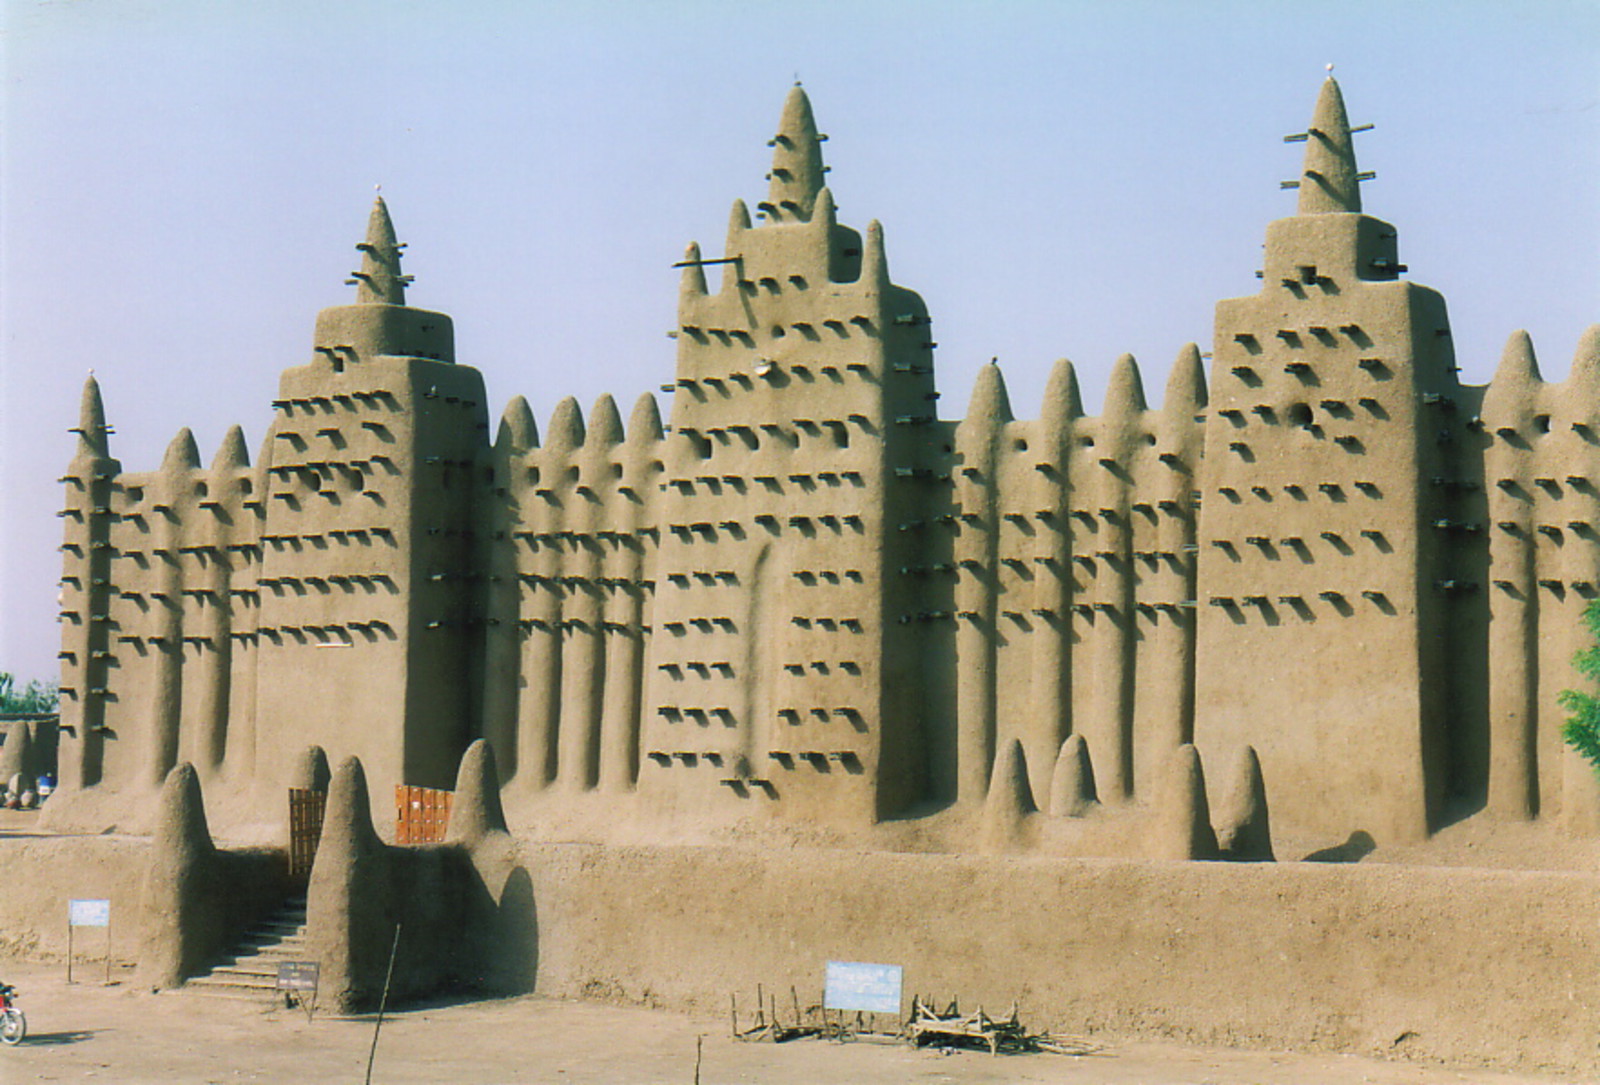 The mud mosque at Djenné